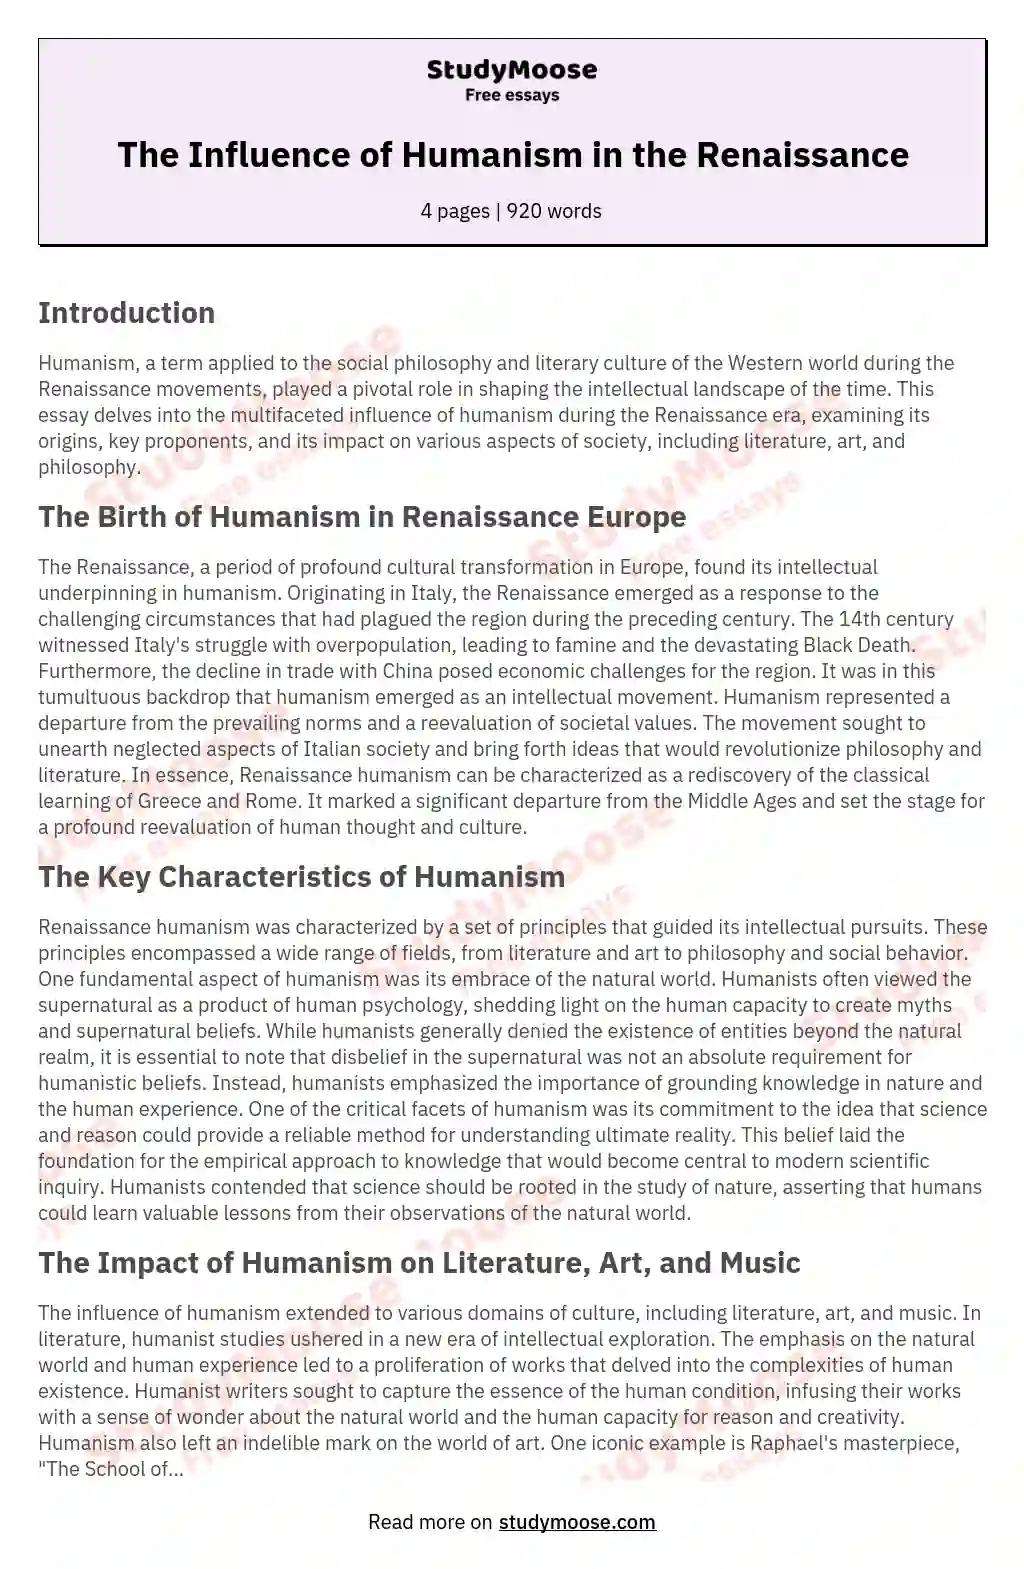 The Influence of Humanism in the Renaissance essay